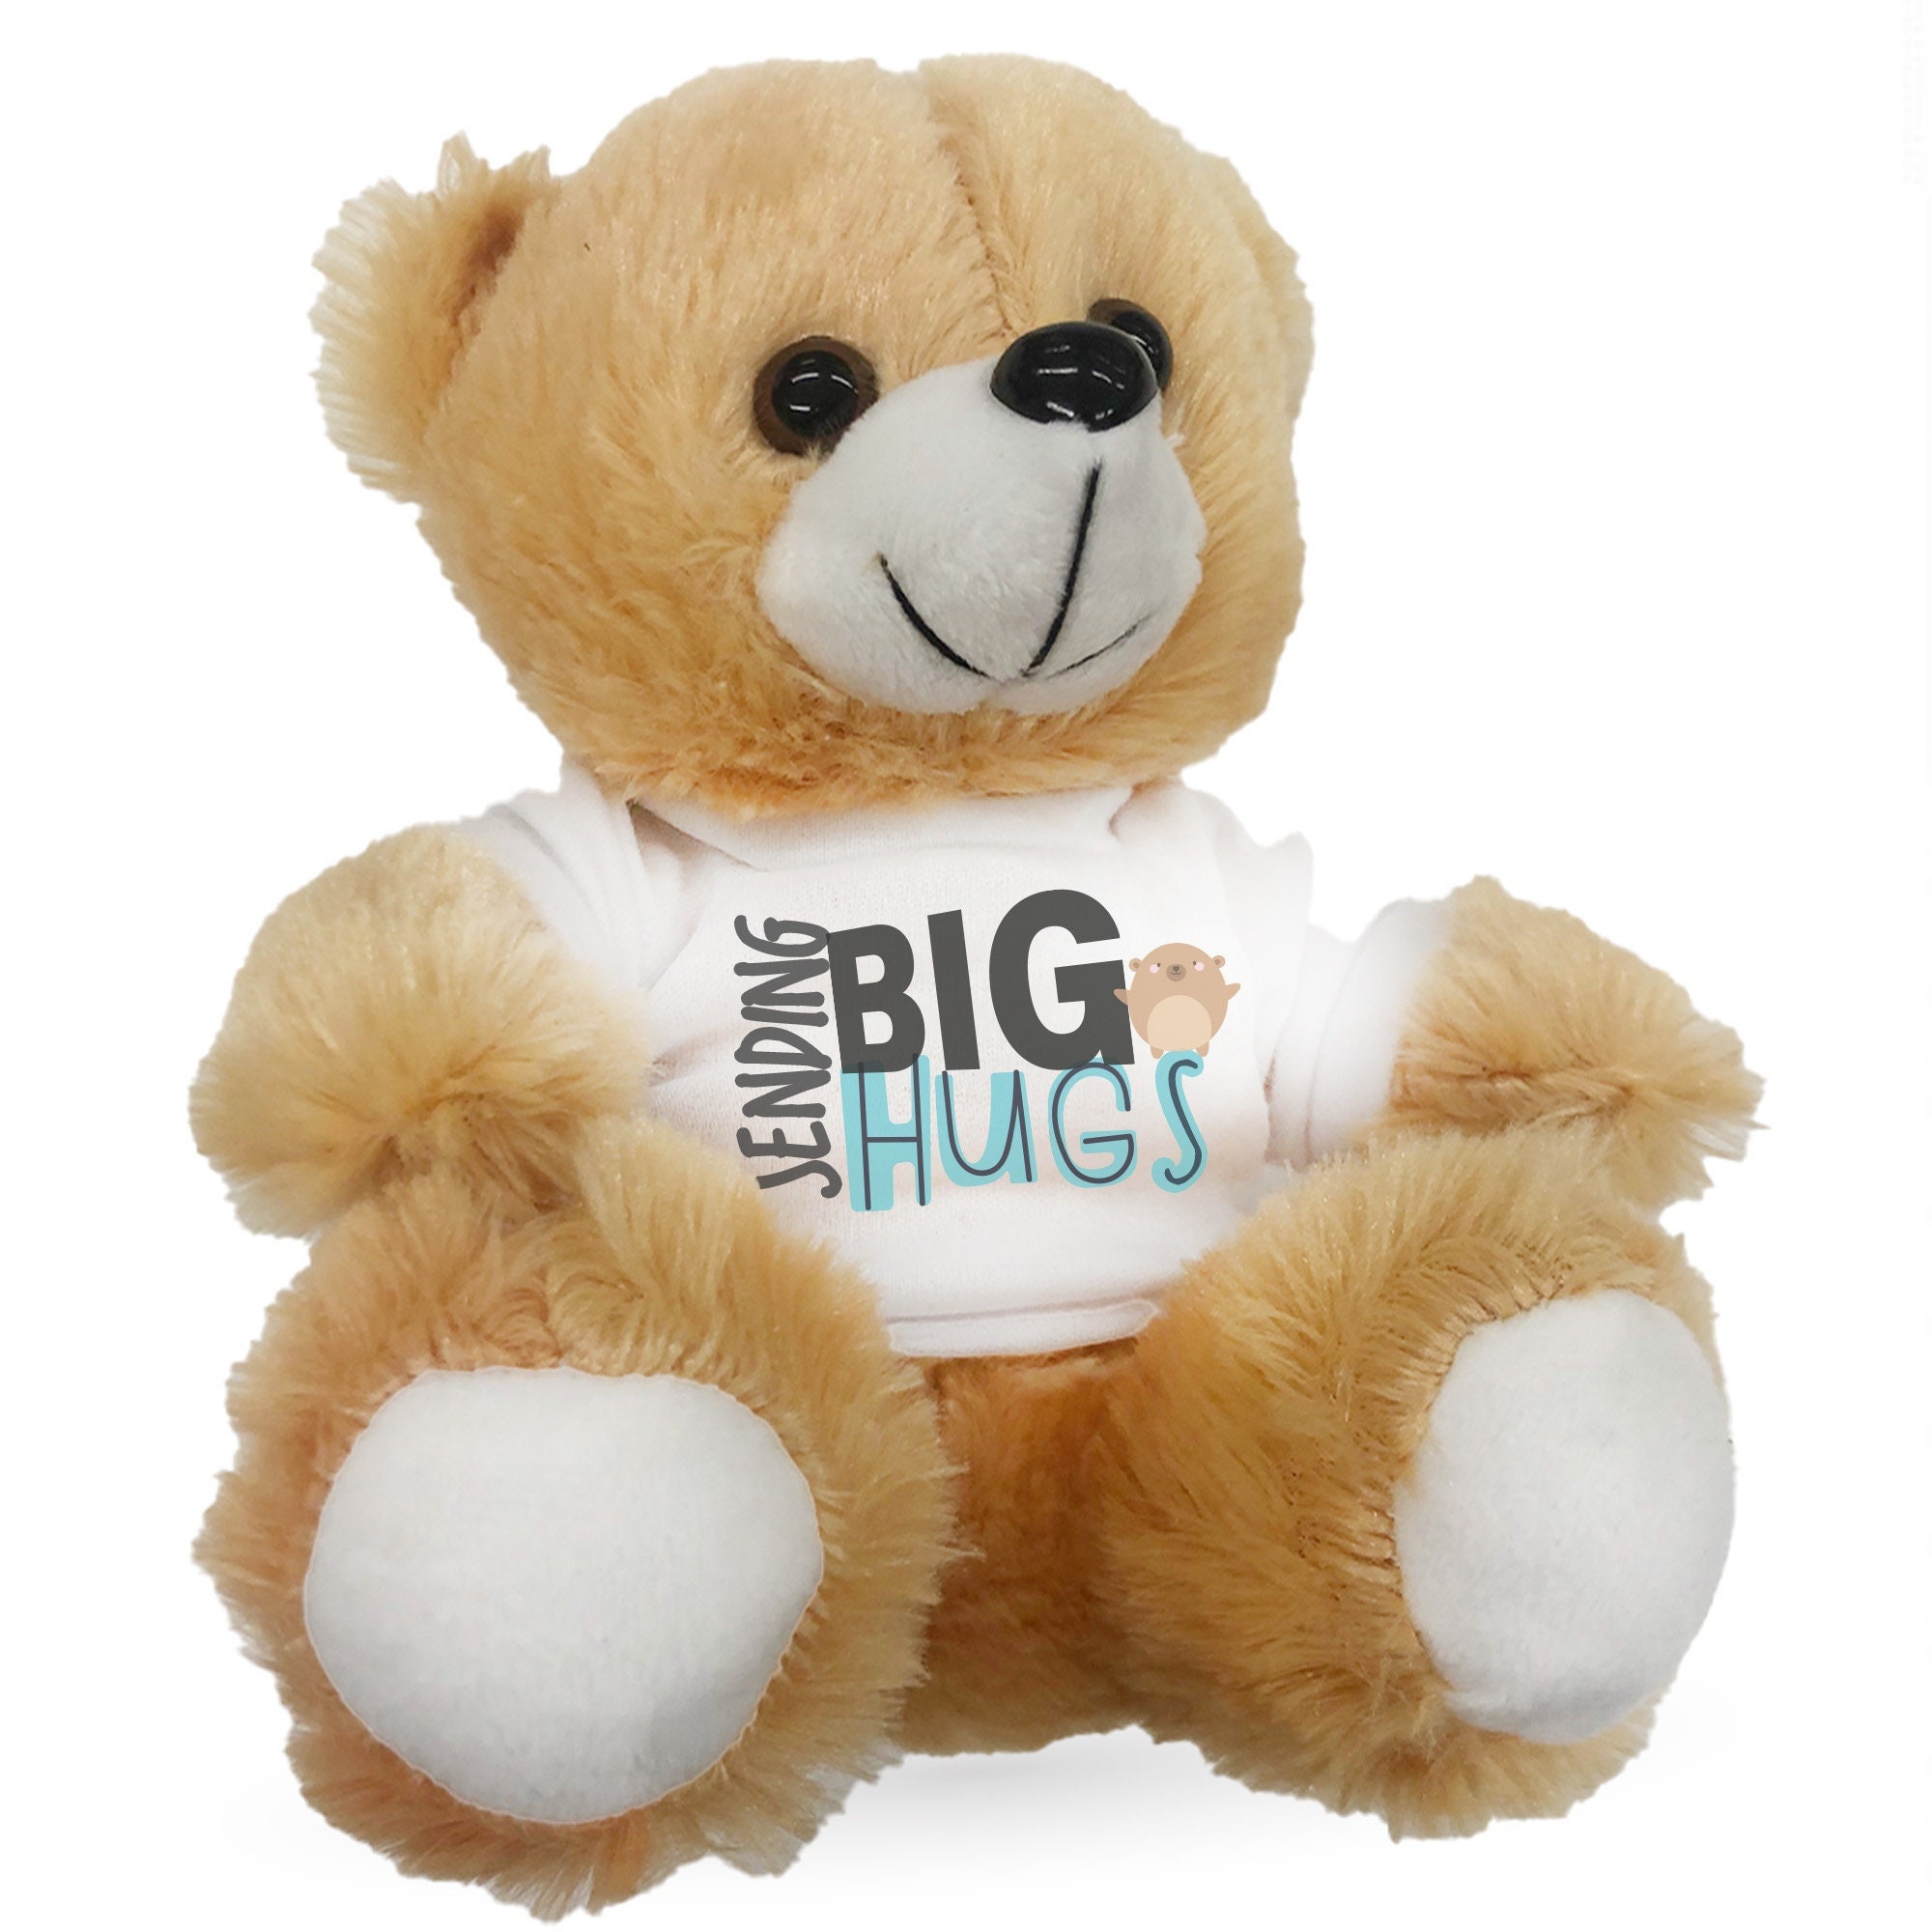 Get Well Soon Gifts for Kids, Get Well Teddy Bear, Get Well Gifts for Women,  Get Well Soon Gifts for Kids We're Sorry You Are Sick 